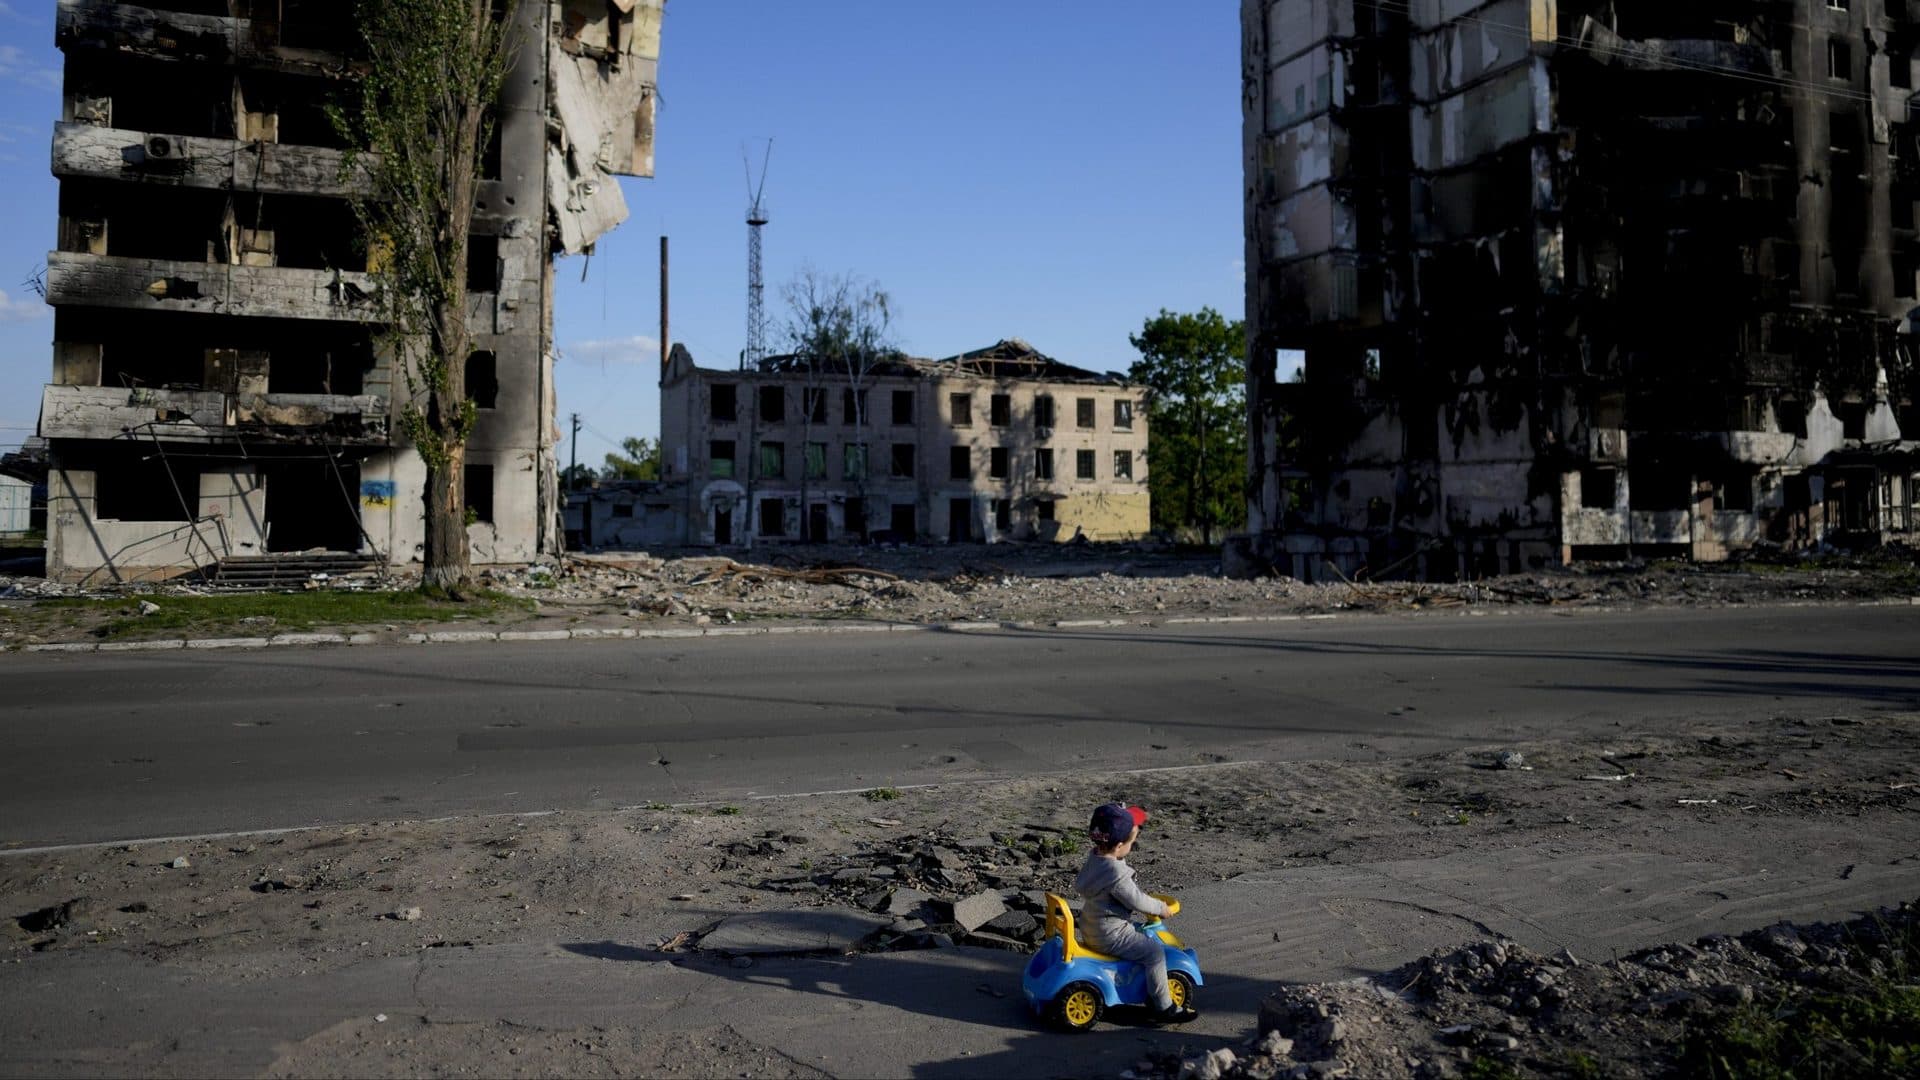 A boy plays in front of houses ruined by shelling in Borodyanka